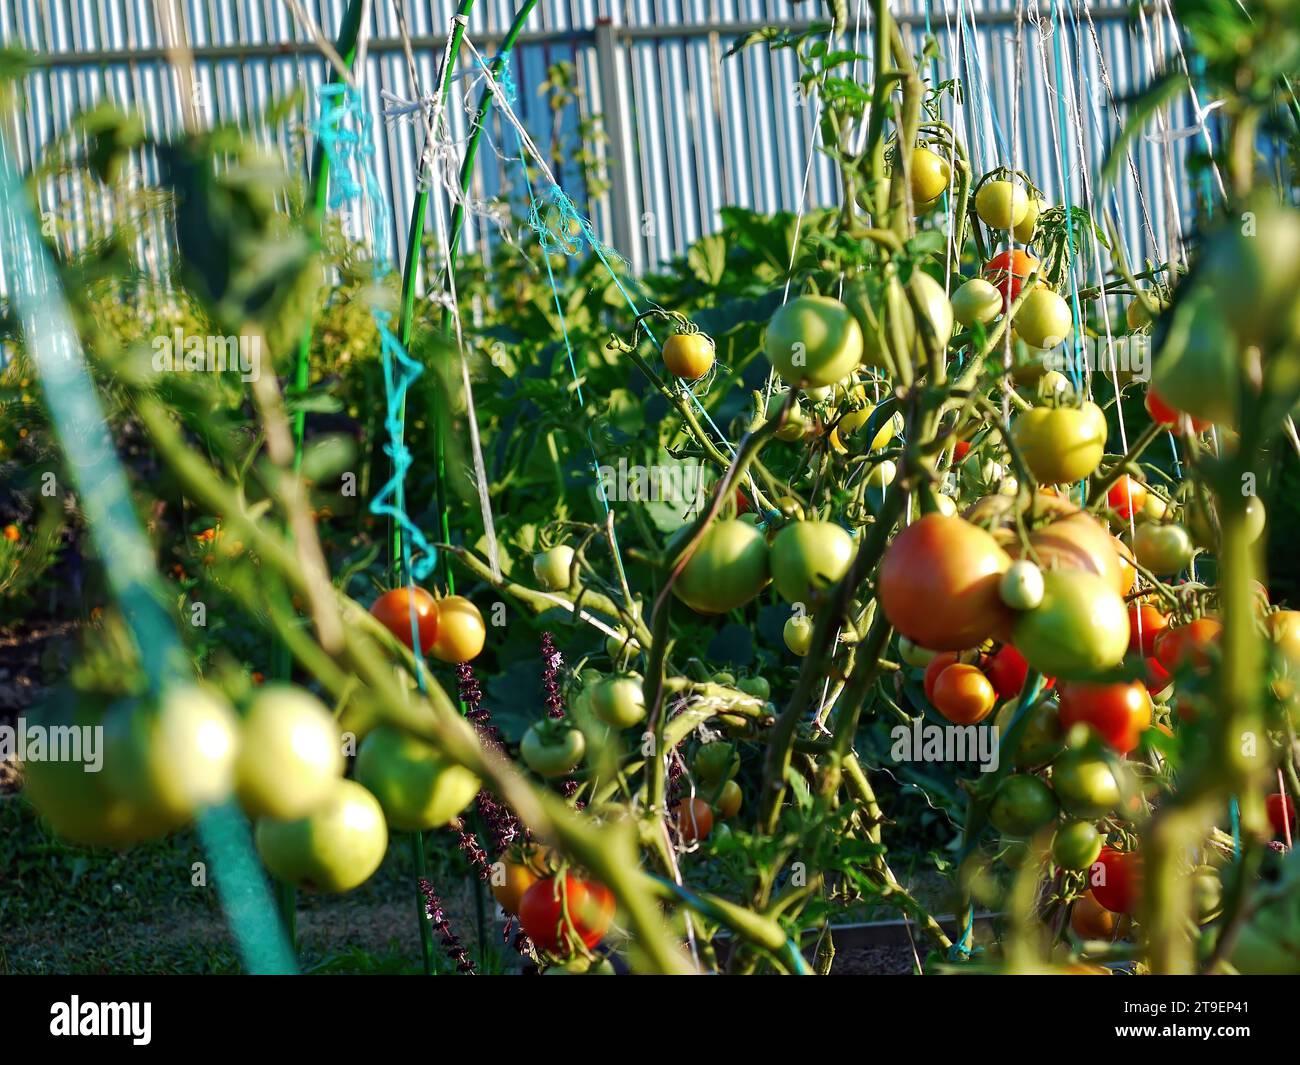 Tomatoes in a garden in the village, in summer Stock Photo